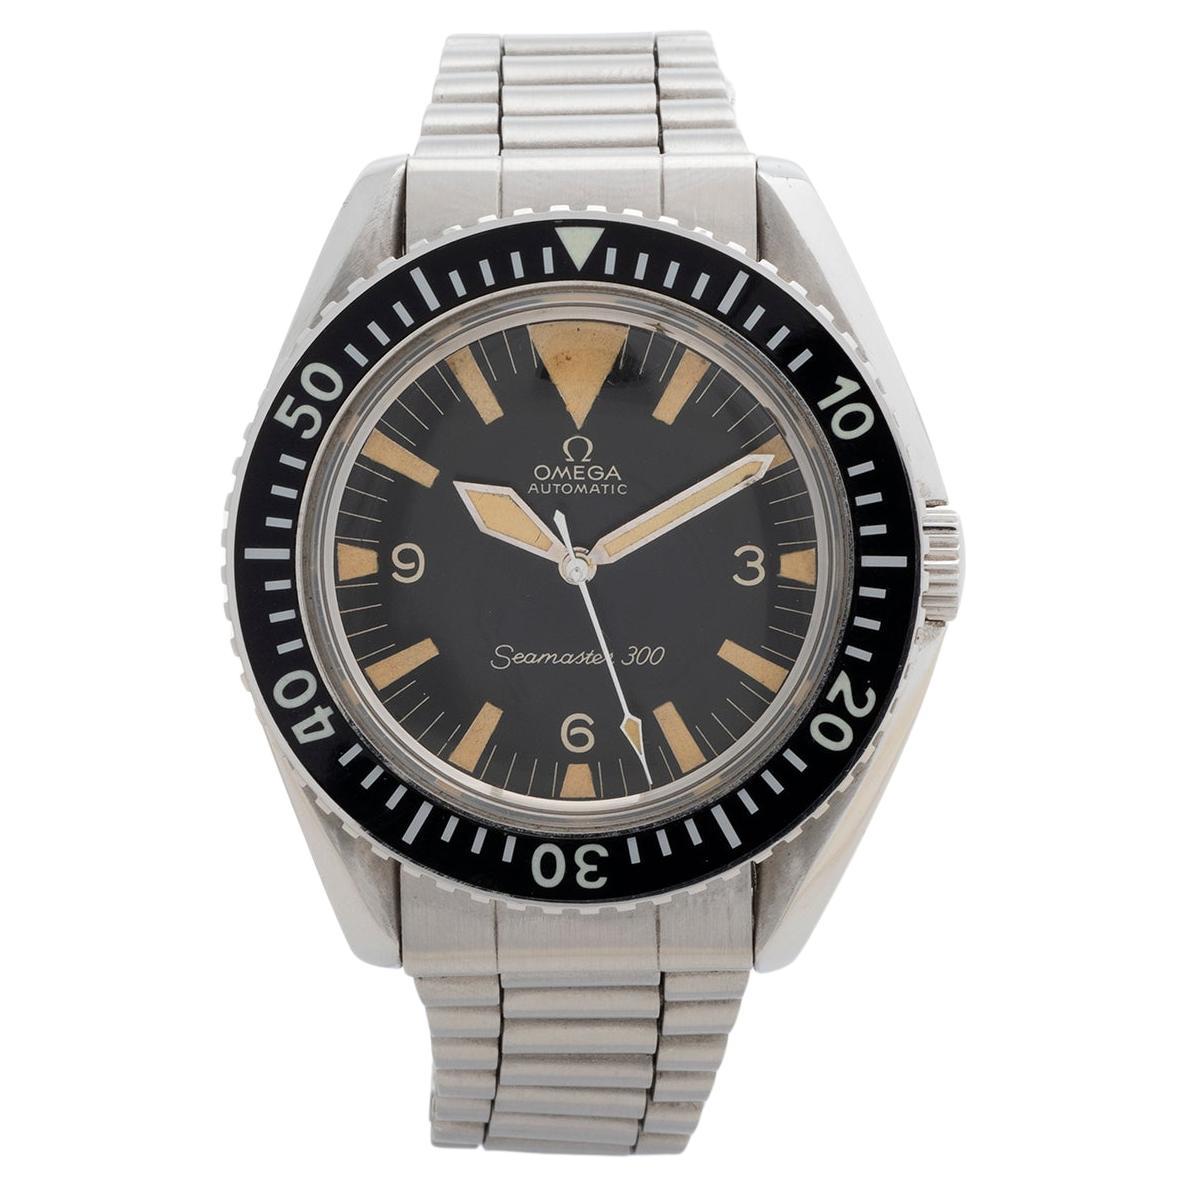 Our vintage and rare Omega Seamaster 300 automatic with 41mm stainless steel case, is a reference 165.024 with desirable big triangle dial with sword hands. Reference 165.024 is powered by a cal 552 automatic movement and this one is presented in